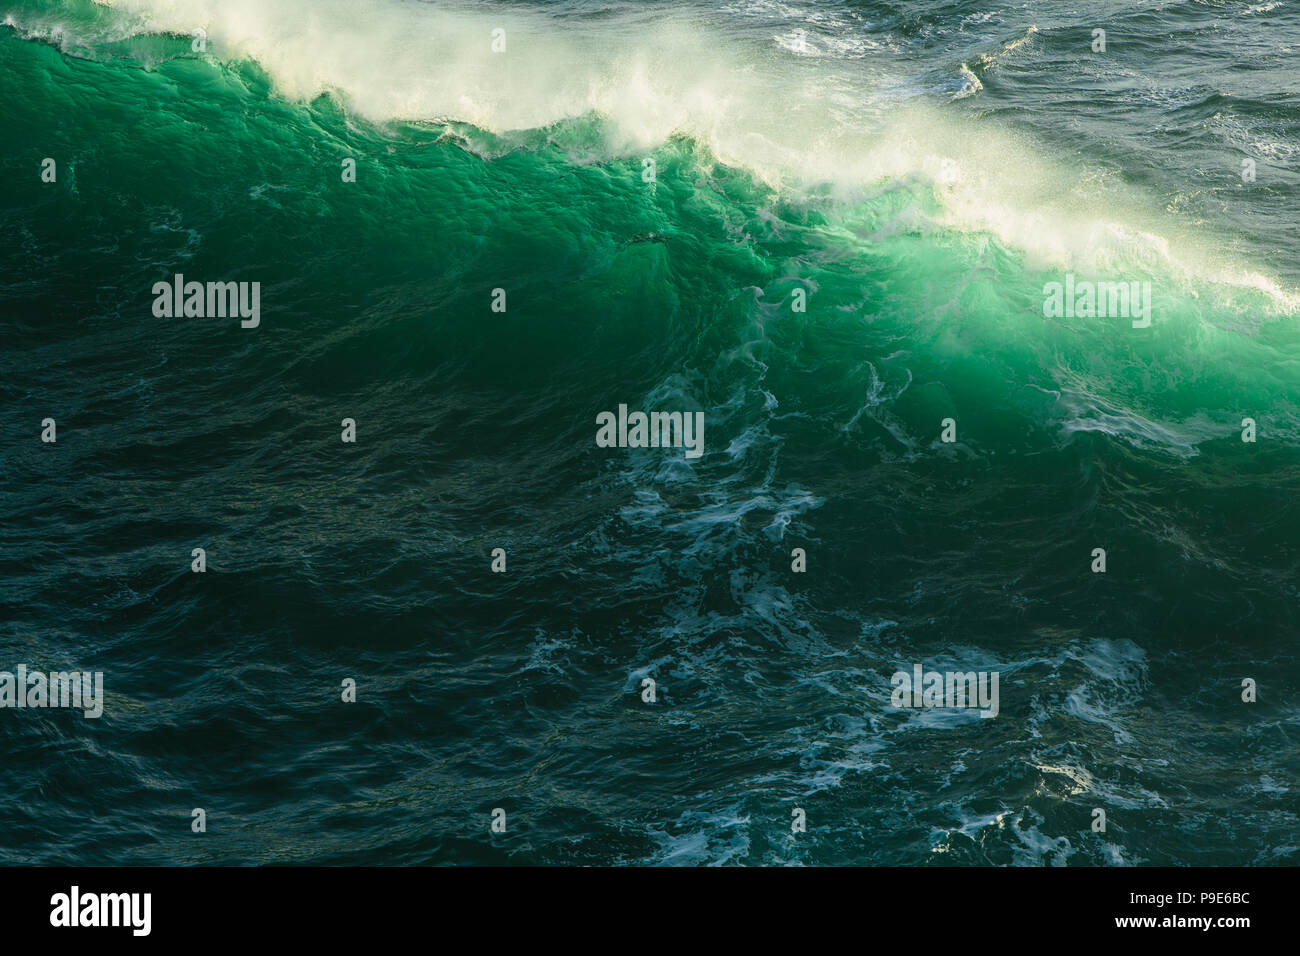 Detail of crashing waves, surf and crest, windblown mist curling from the white water, and deep green ocean water. Stock Photo